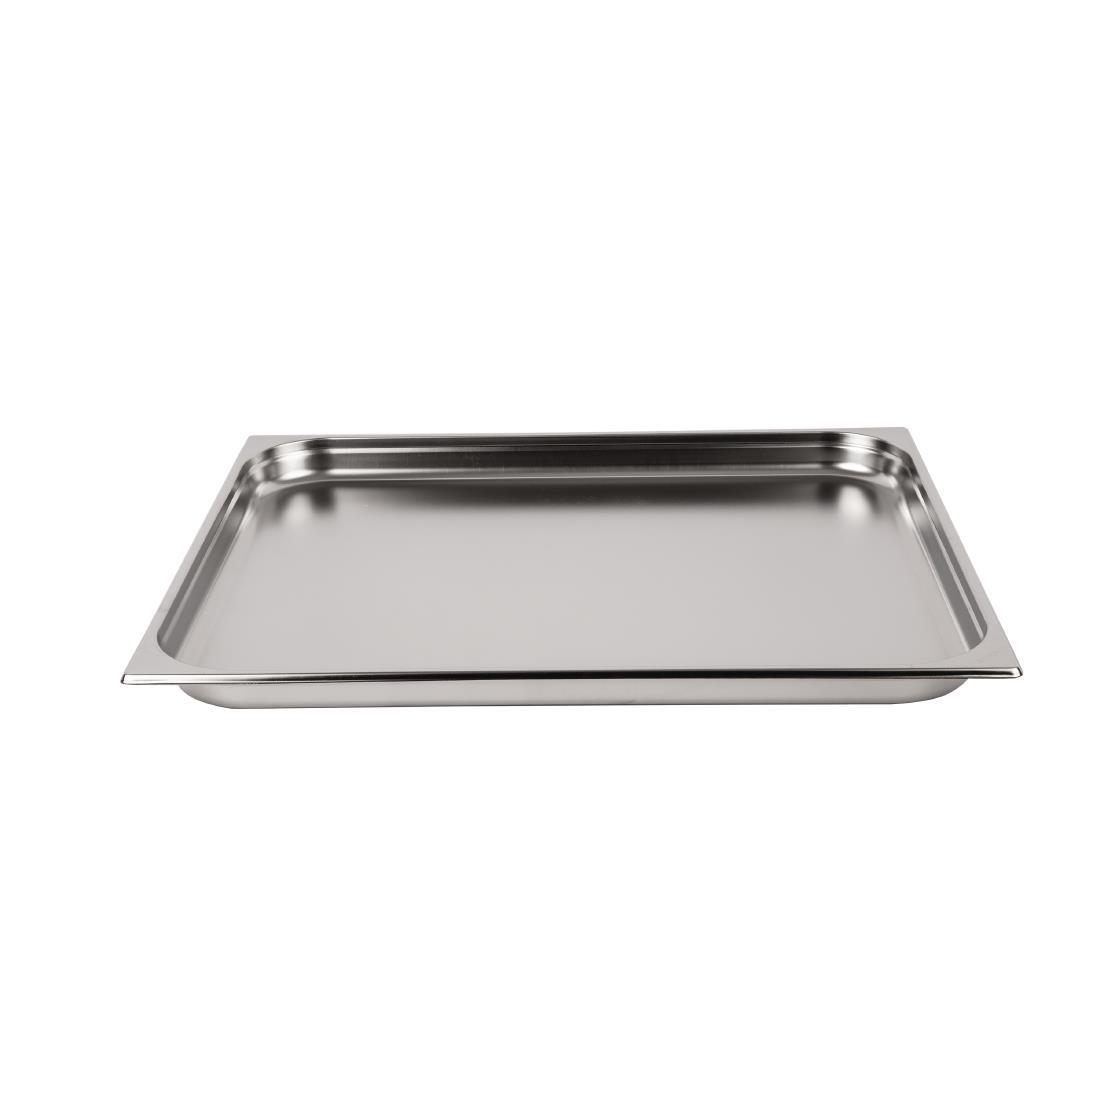 Vogue Stainless Steel 2/1 Gastronorm Pan 40mm - K801  - 2